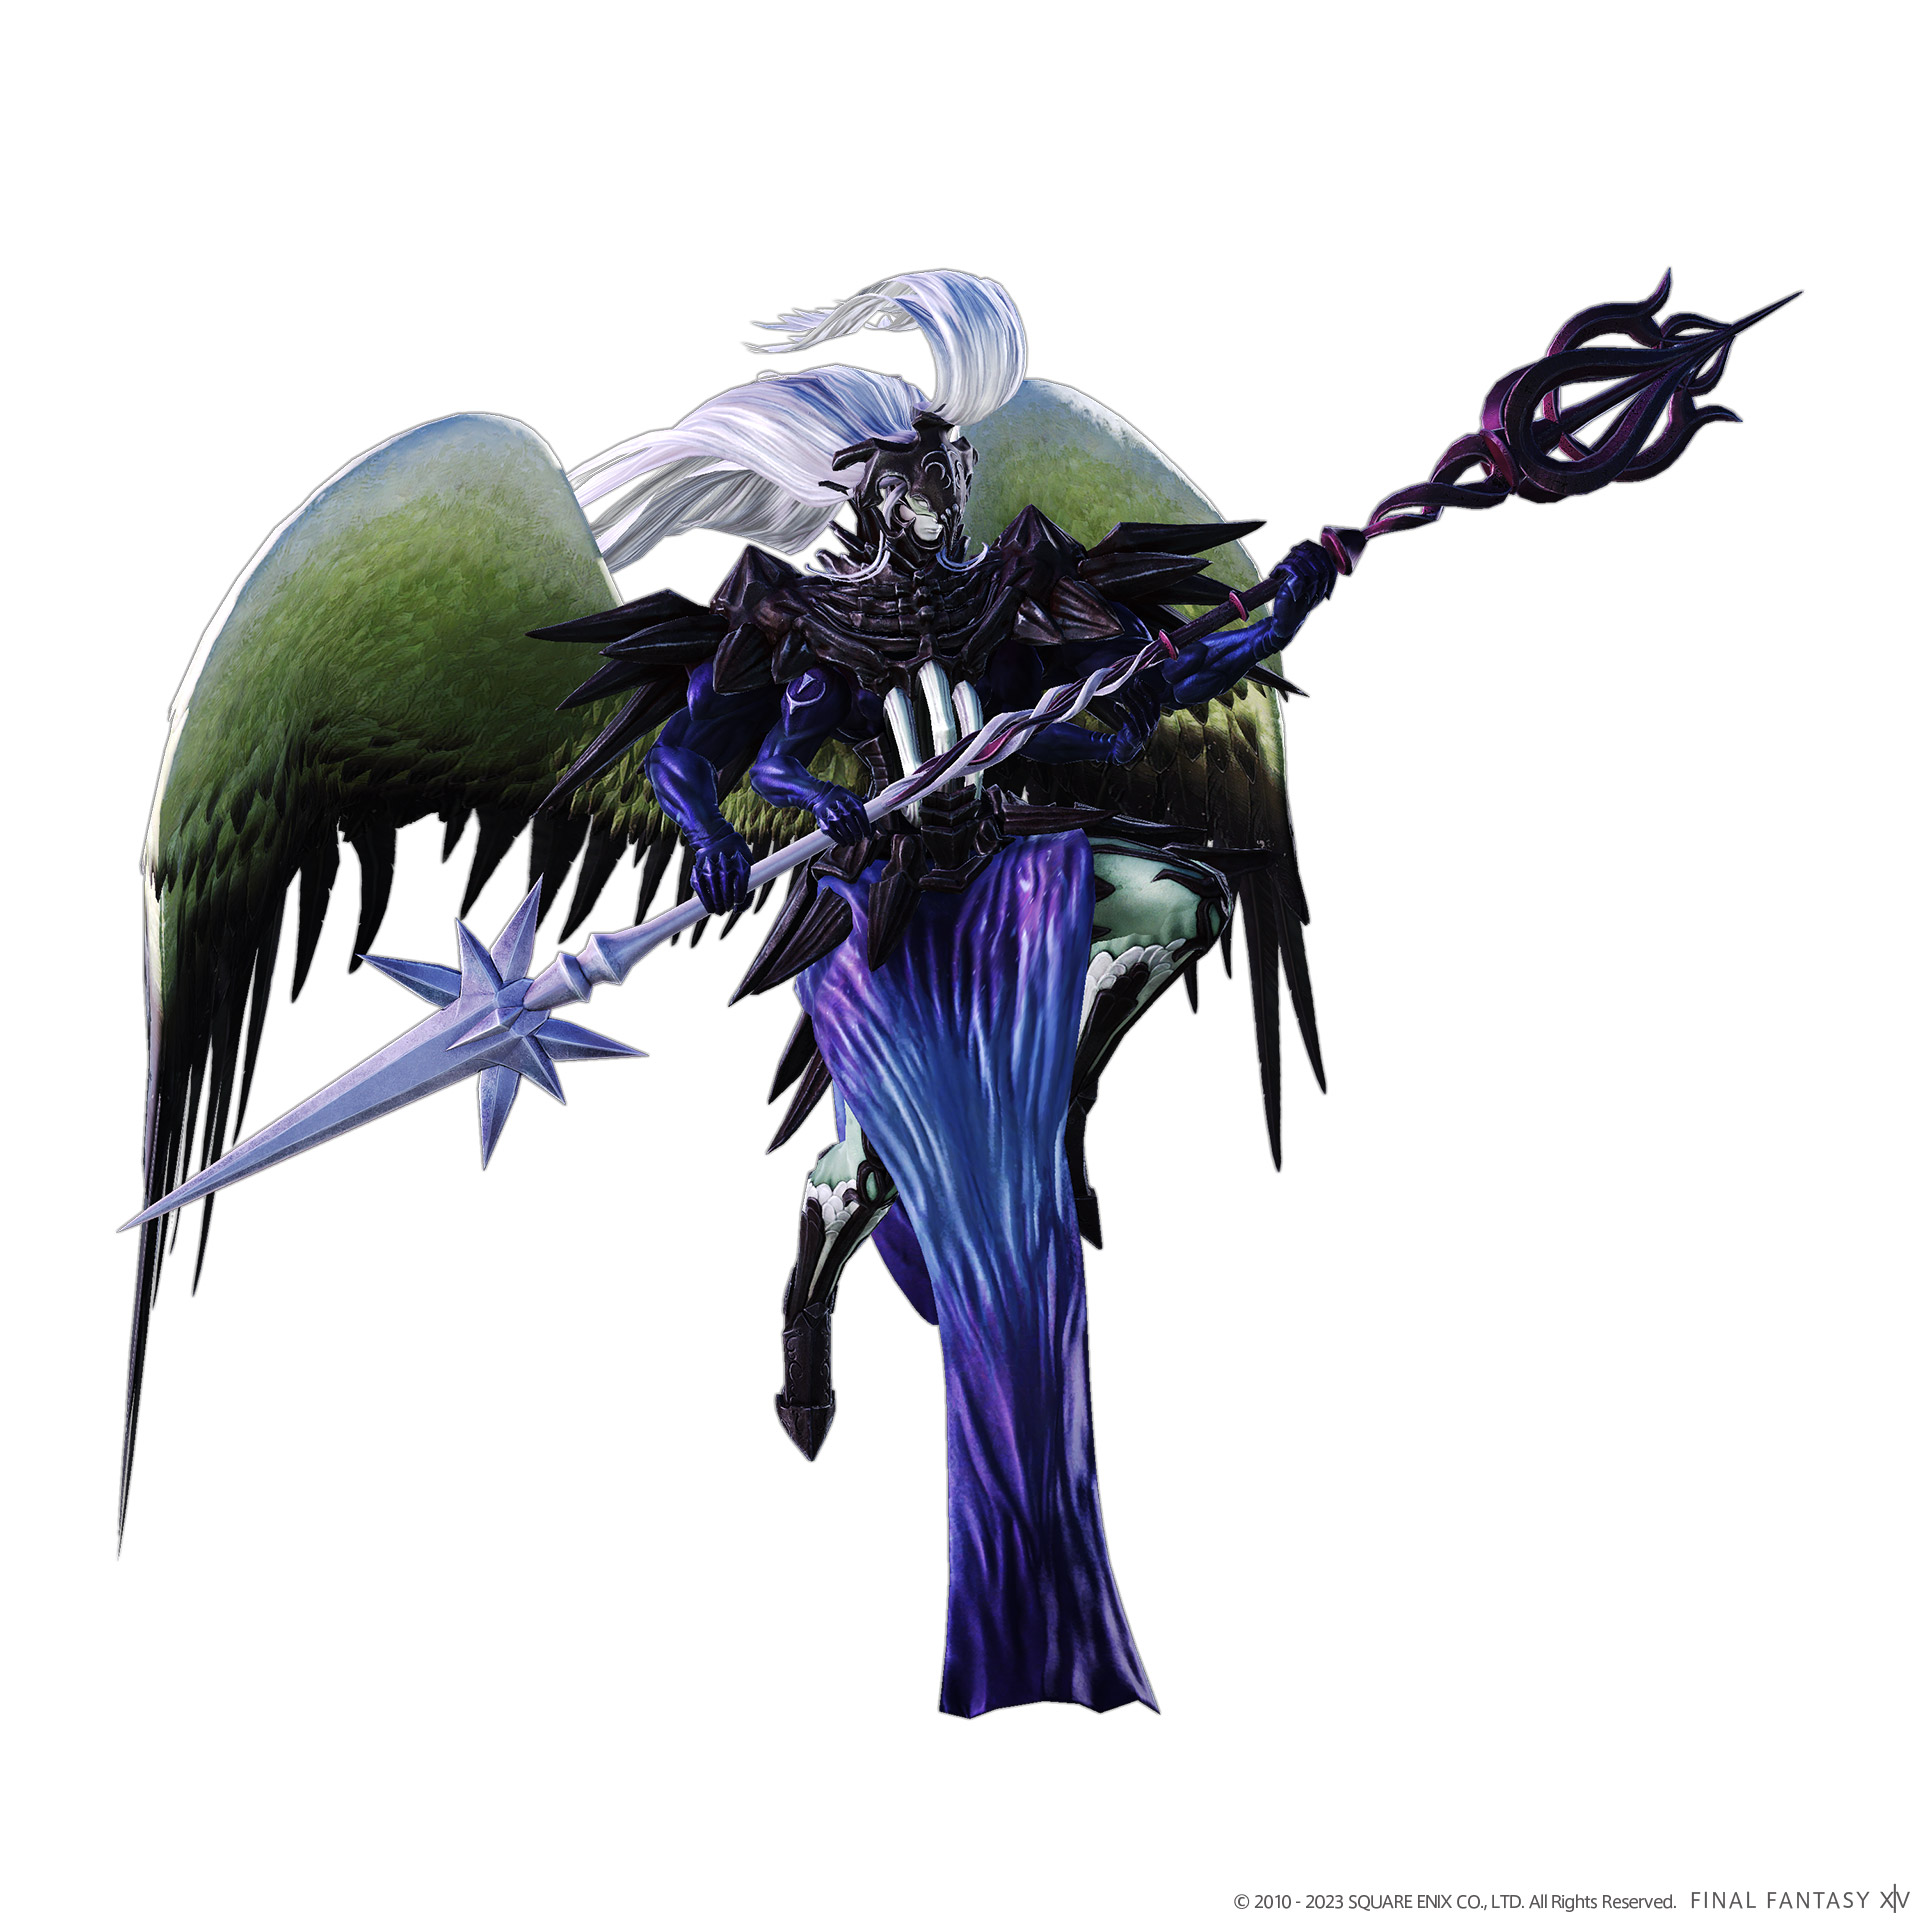 The official render of Themis from Final Fantasy XIV.